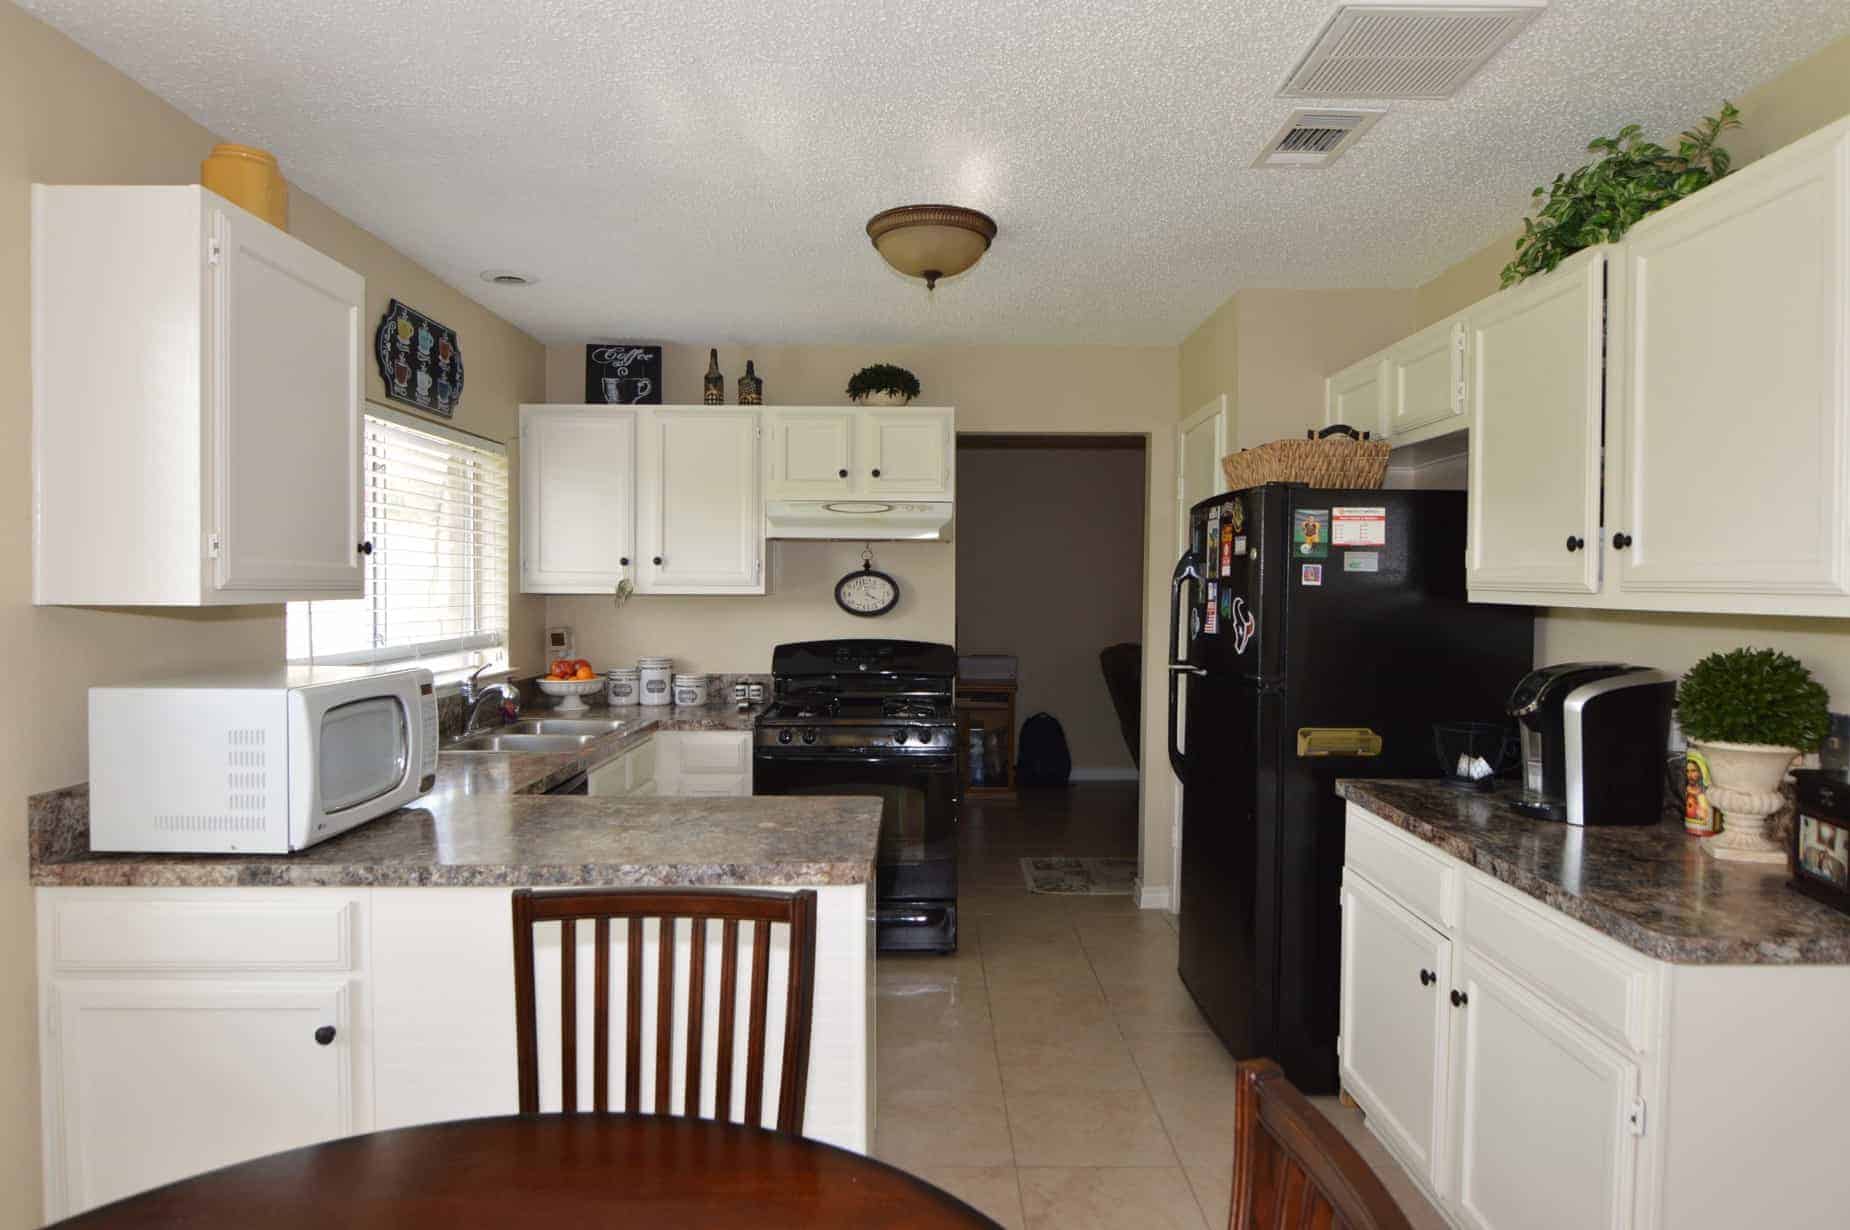 Kitchen of 12030 Yearling Dr, Houston, TX 77065